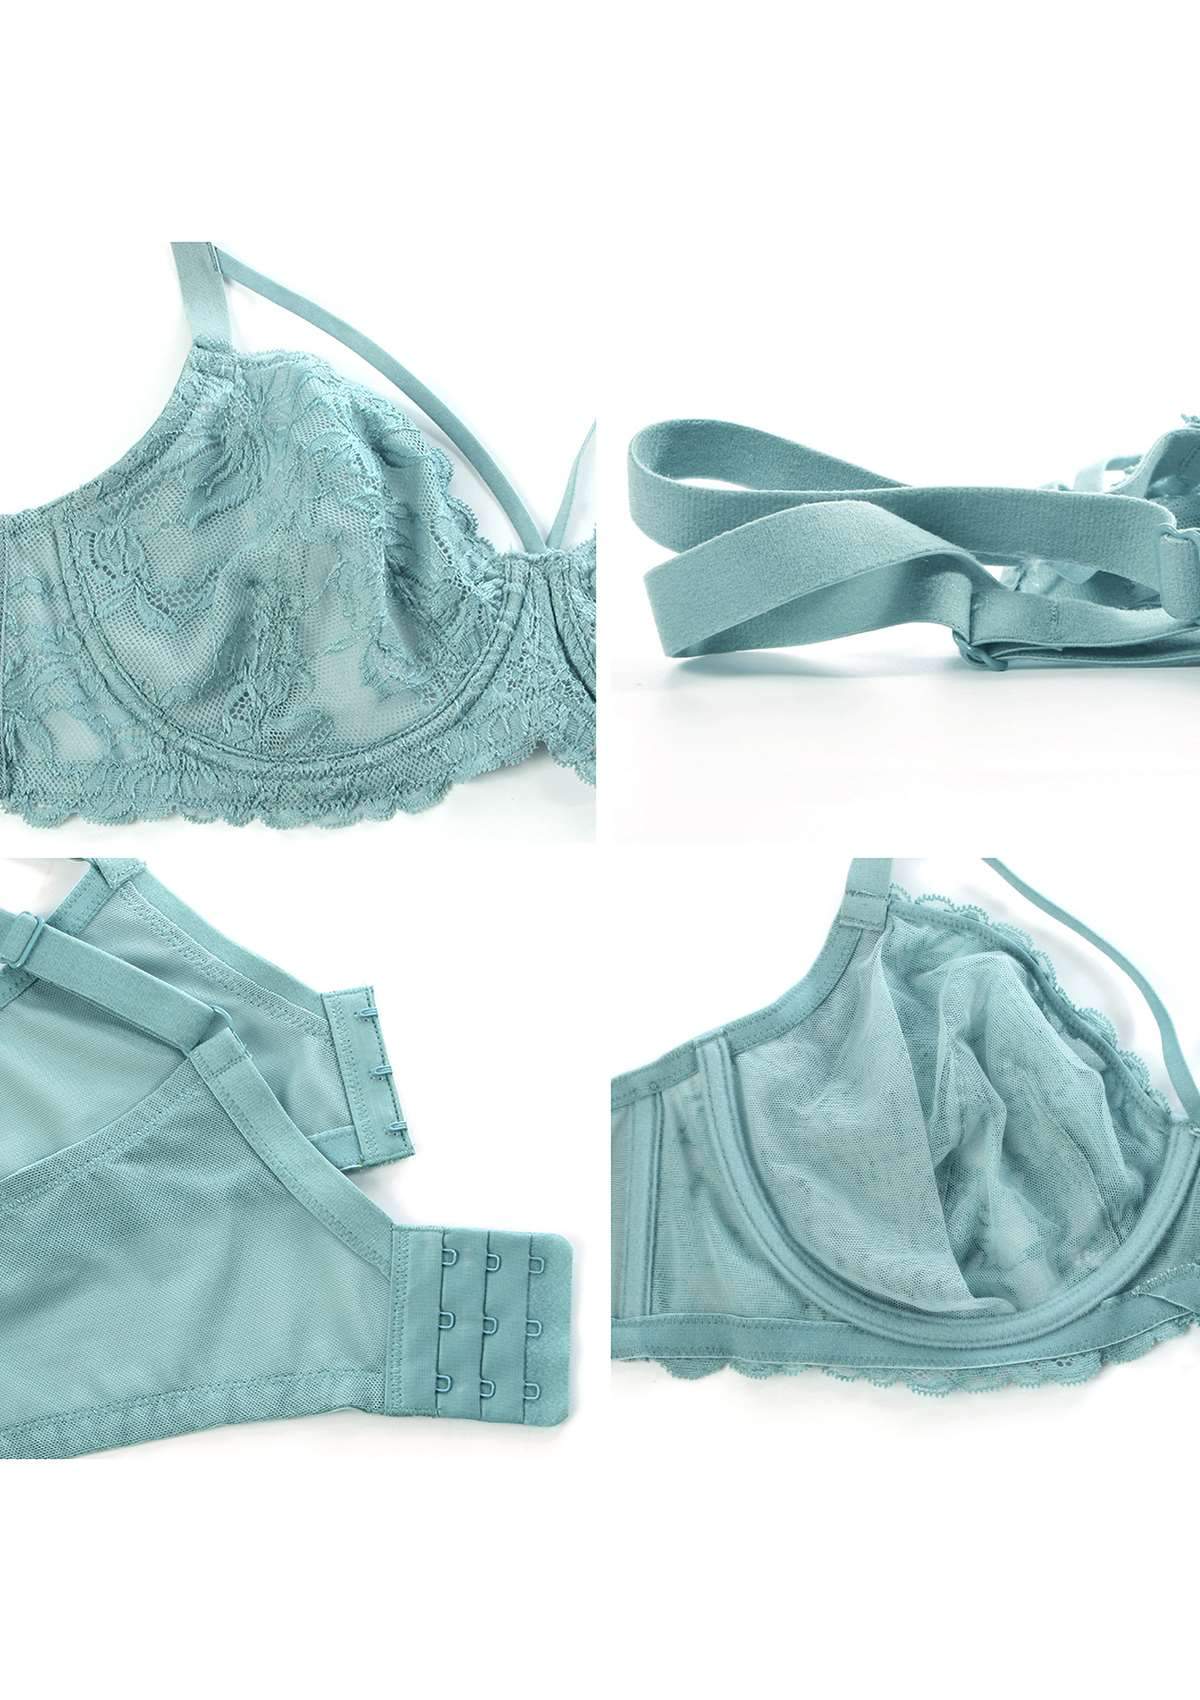 HSIA Pretty In Petals Unlined Lace Bra: Comfortable And Supportive Bra - Pewter Blue / 40 / D